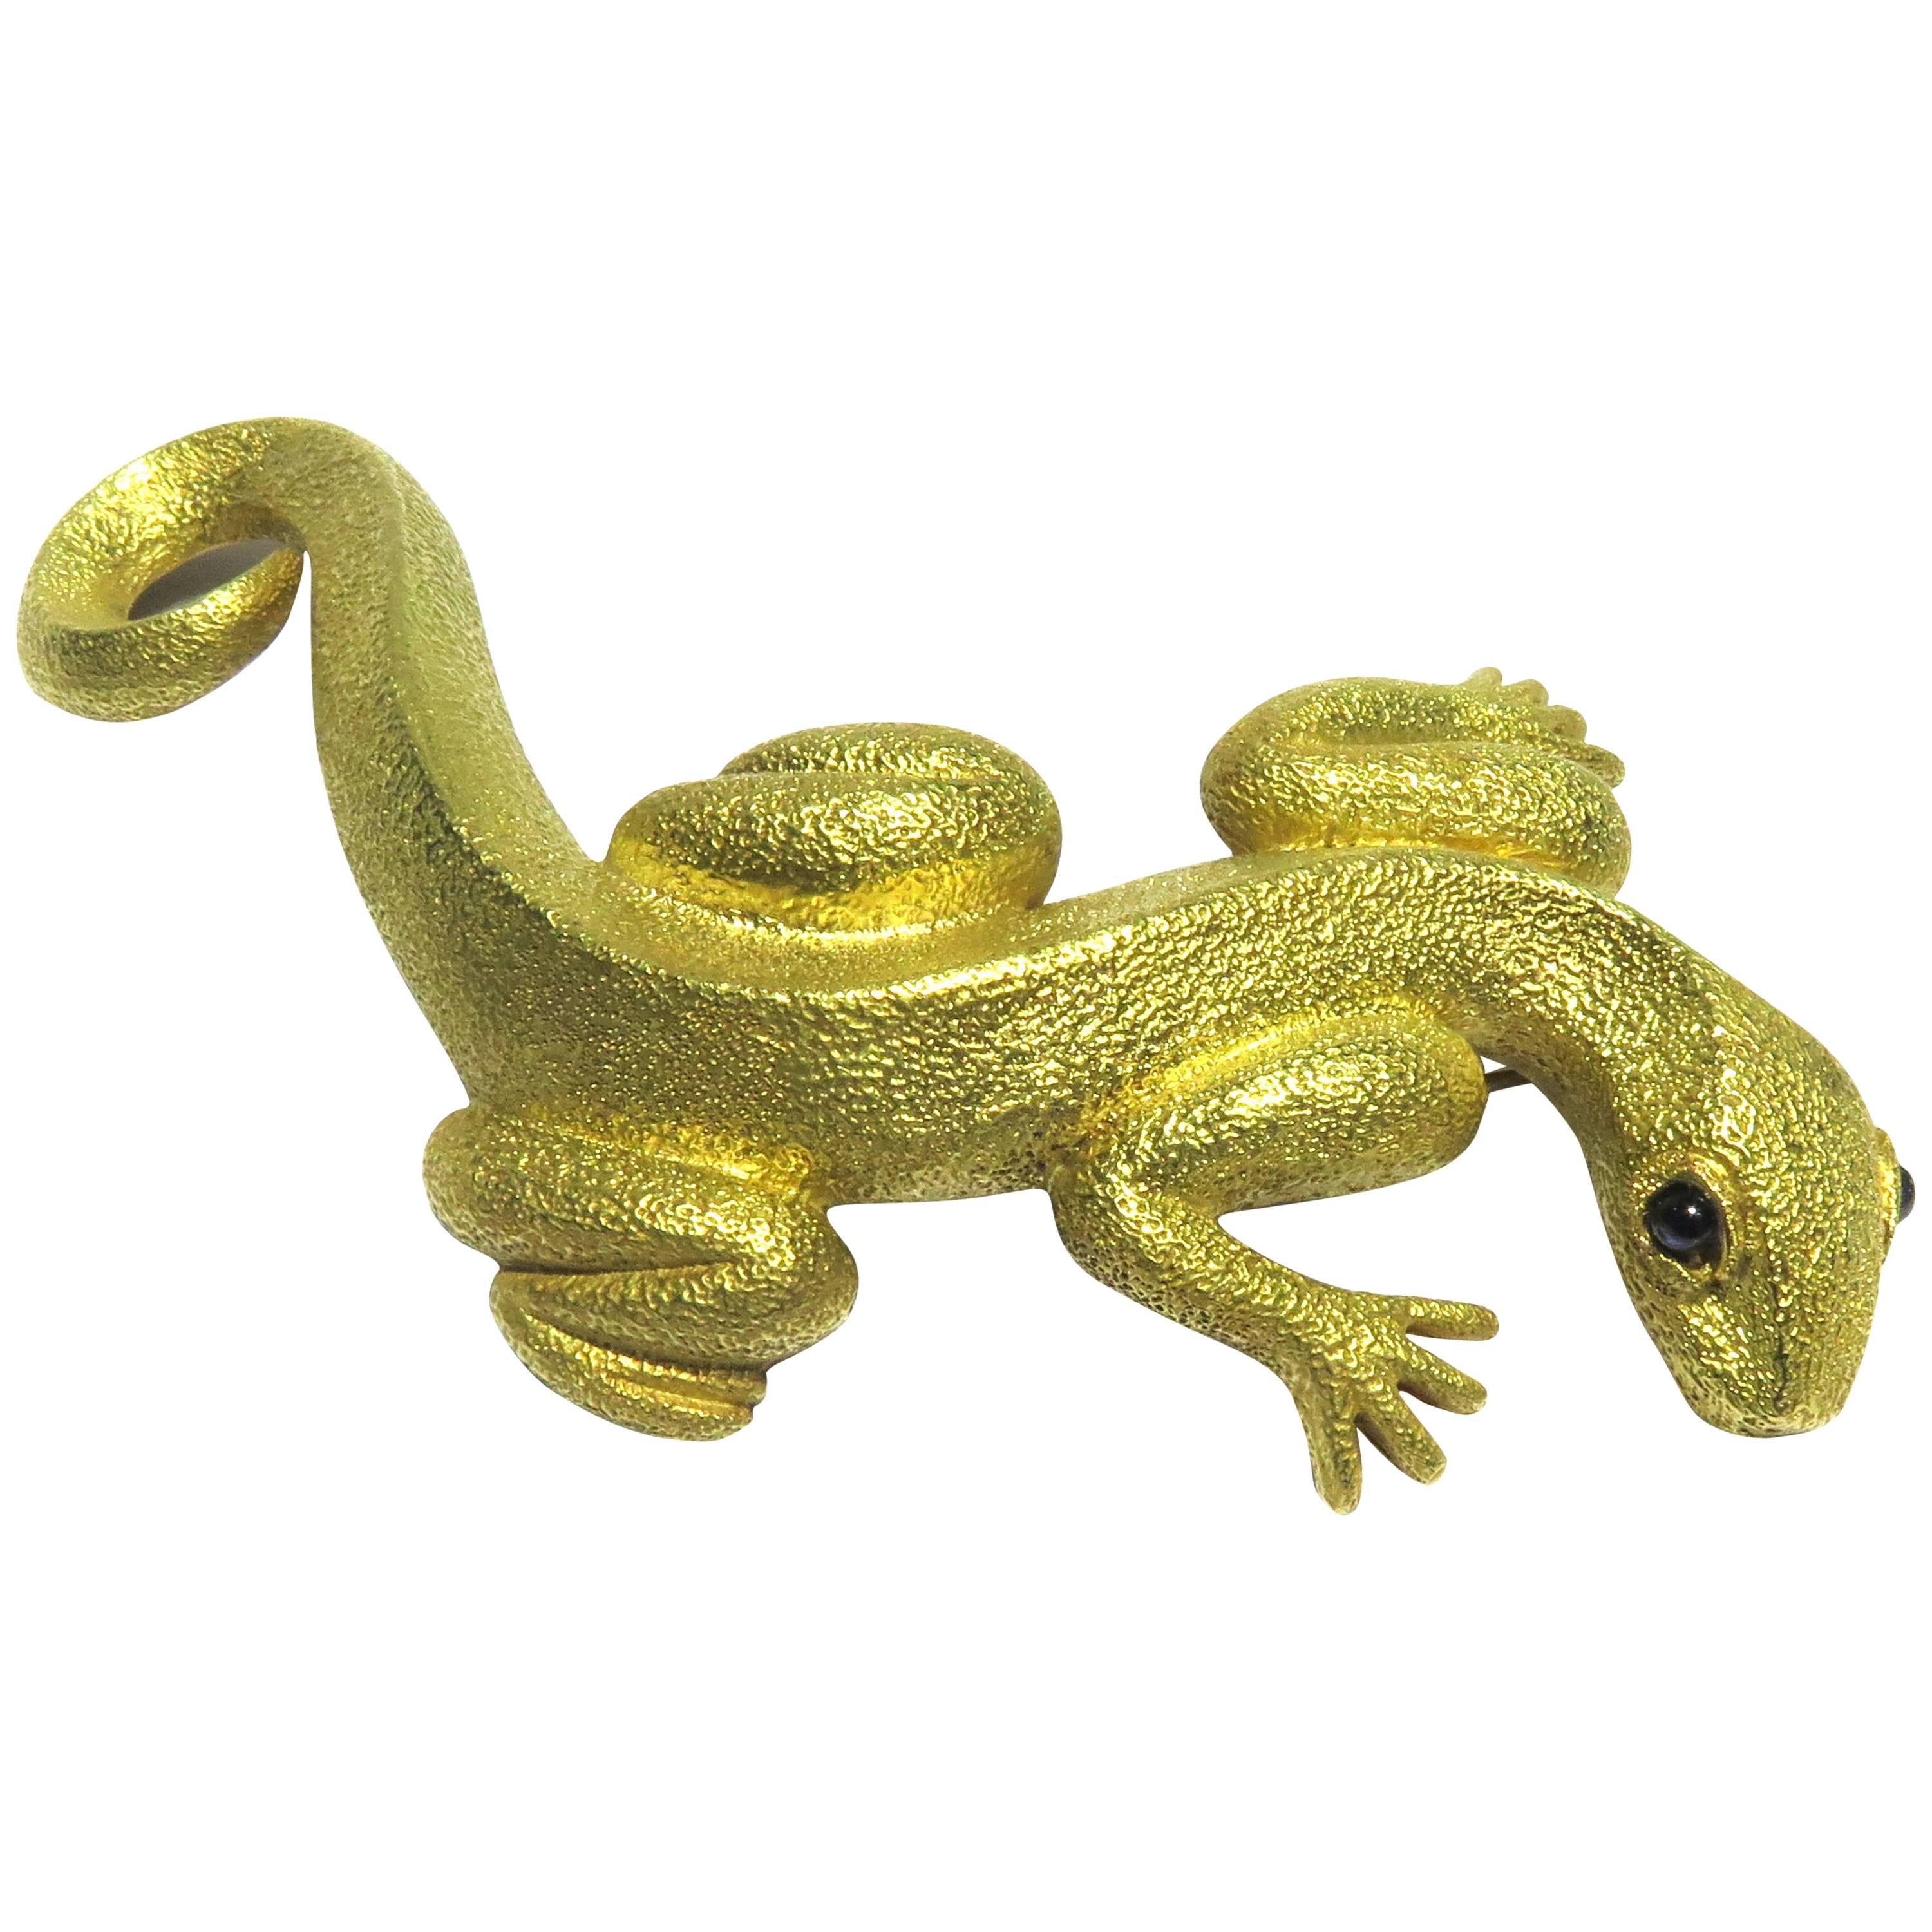 Kieselstein-Cord Enormous Gold Lizard/Salamander Sapphire Pin/Brooch Dated 1990 For Sale